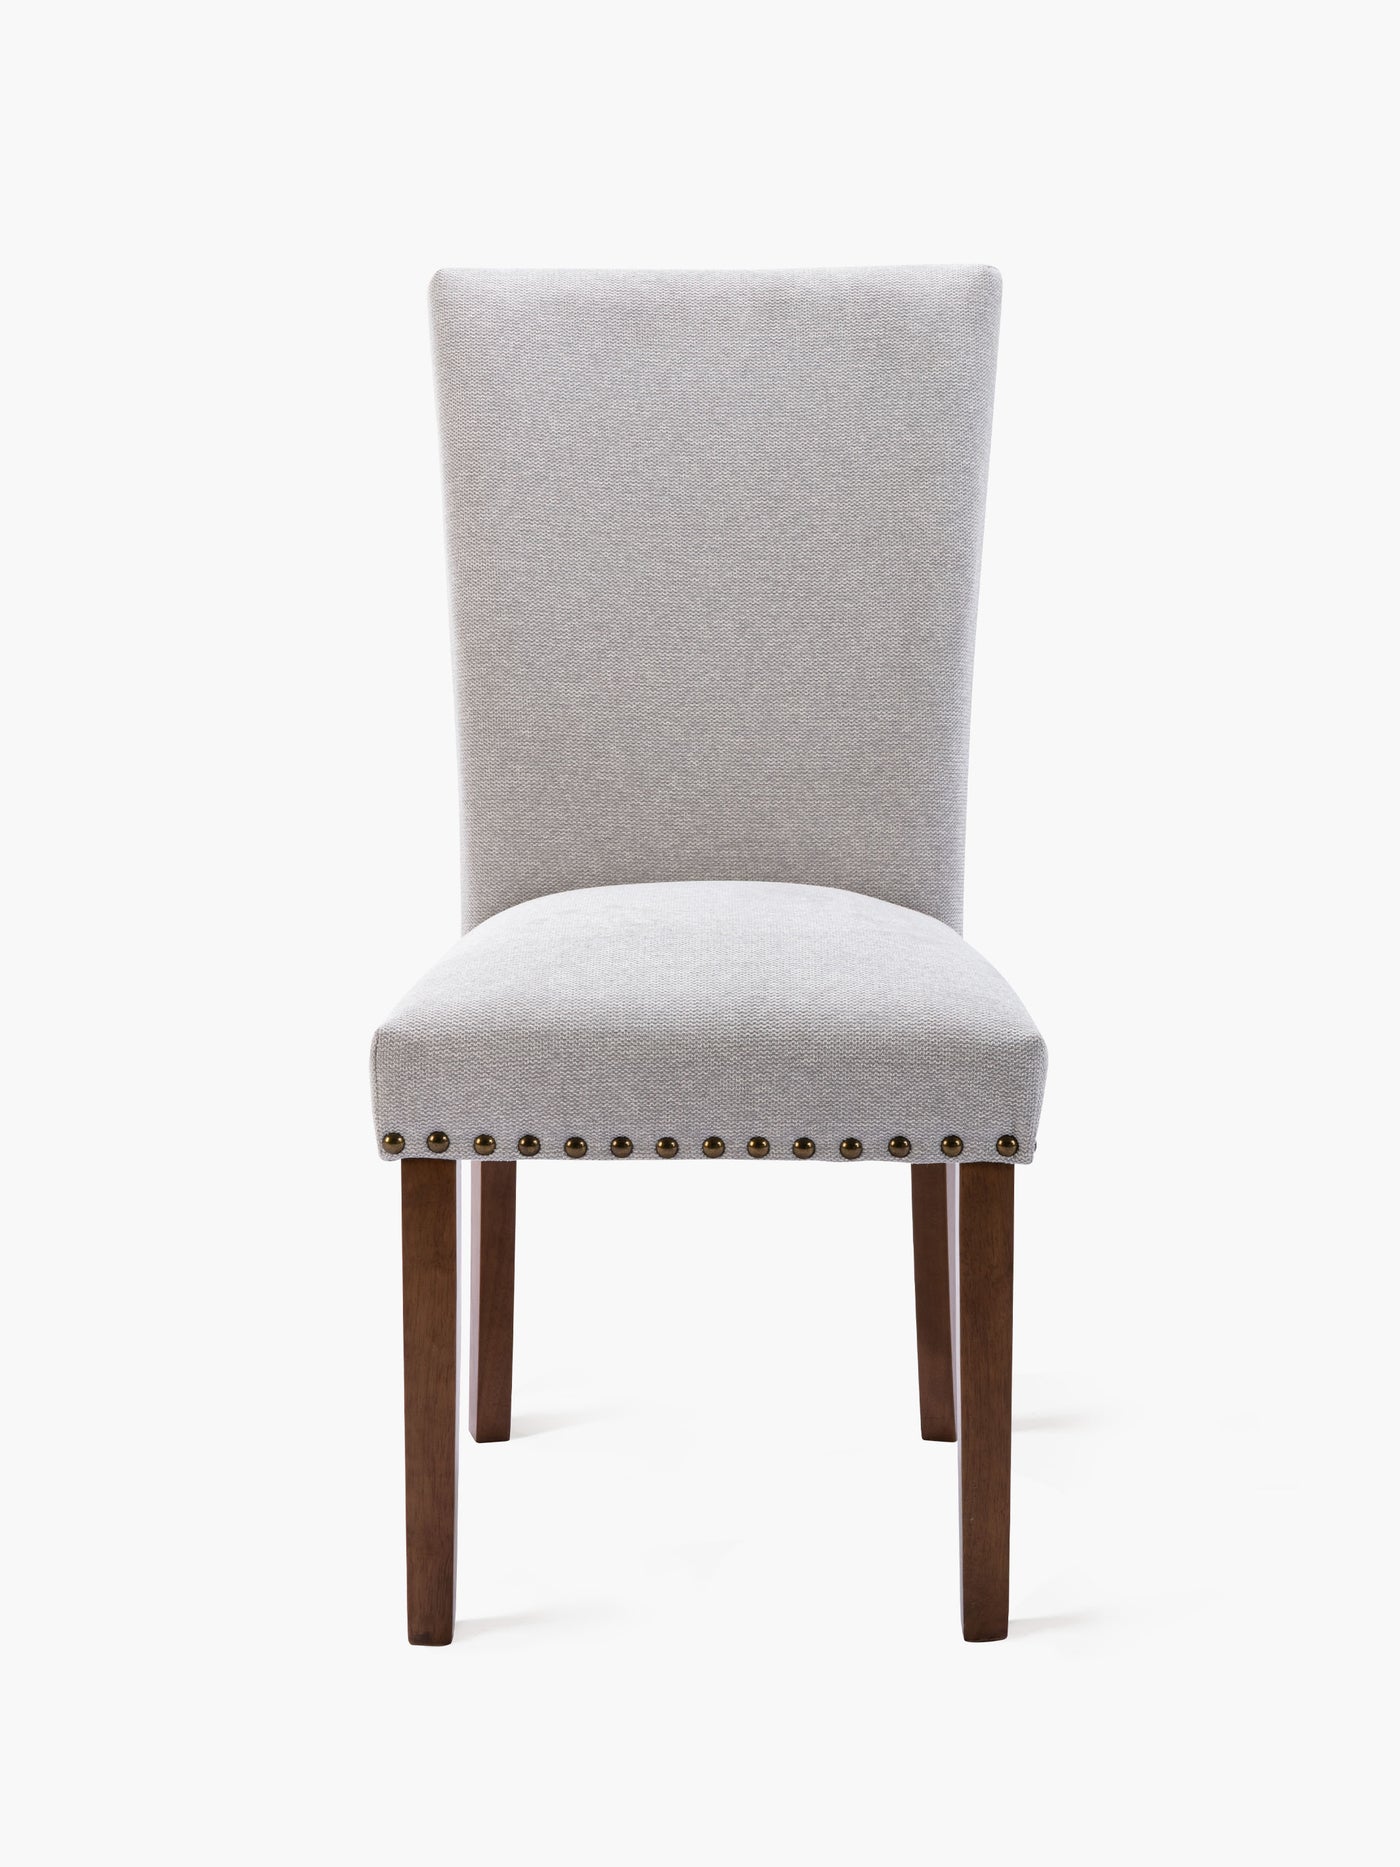 COLAMY Tufted Dining Chair CL420 Light Gray #color_lightgray